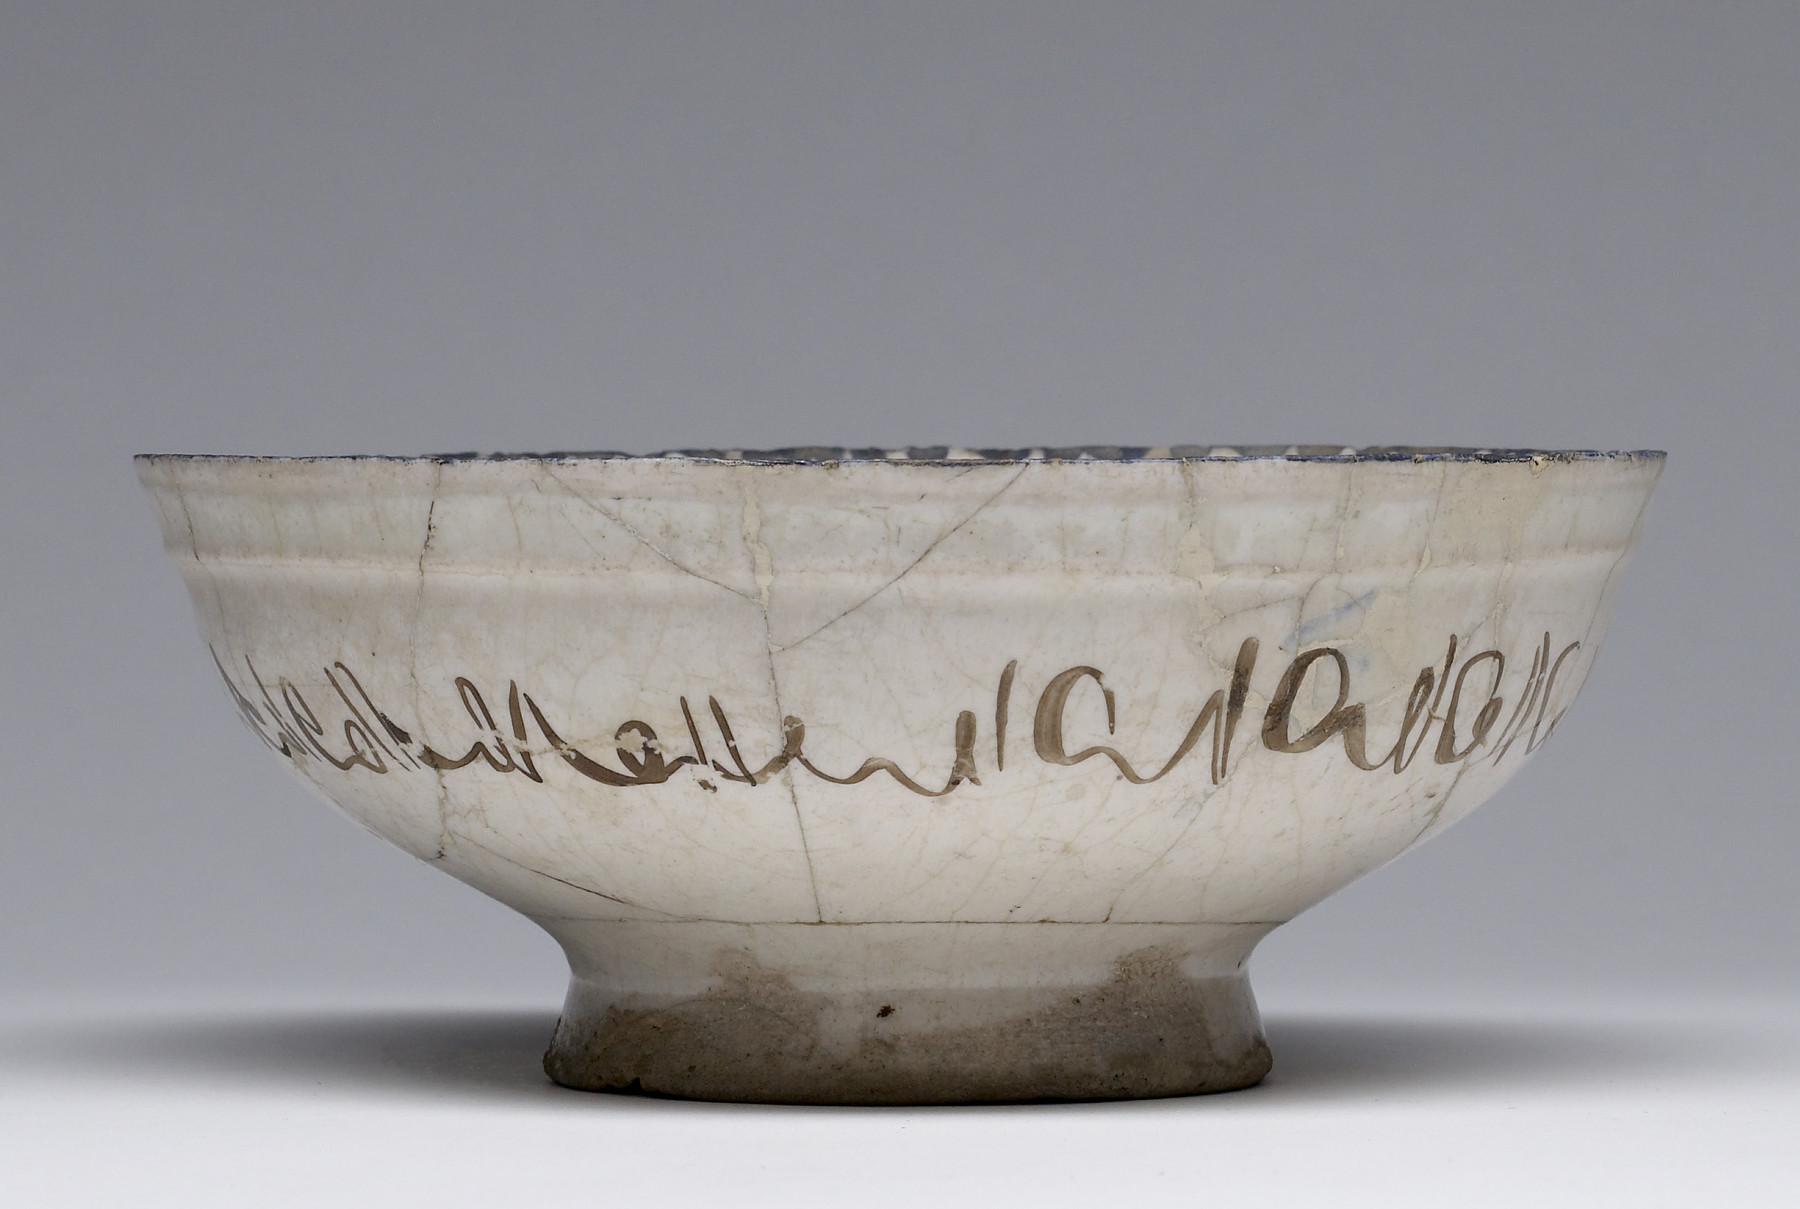 Image for Bowl with Two Figures Flanking a Tree